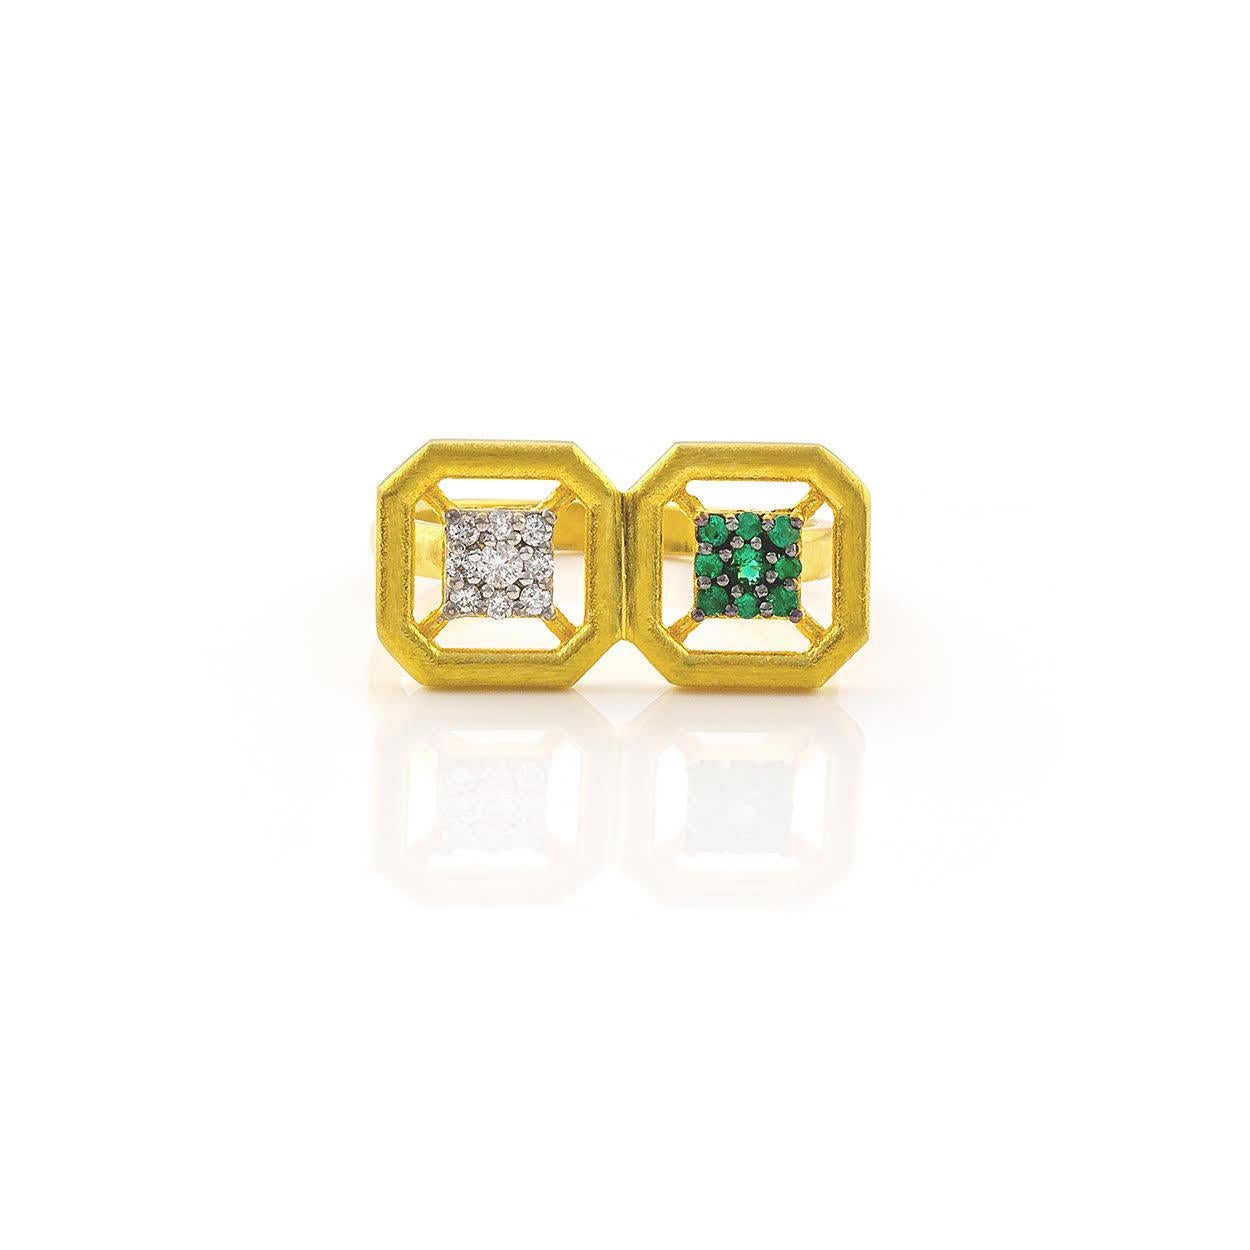 100% recycled 14K Yellow Gold, plated with 22K Gold

Diamond

Emerald

Size: on order

Ancient Gold Jewelry collection inspired by the antiquity, for young women and men, called Apollonian.

Apollonian is

The beauty of youth
The antiquity
The love